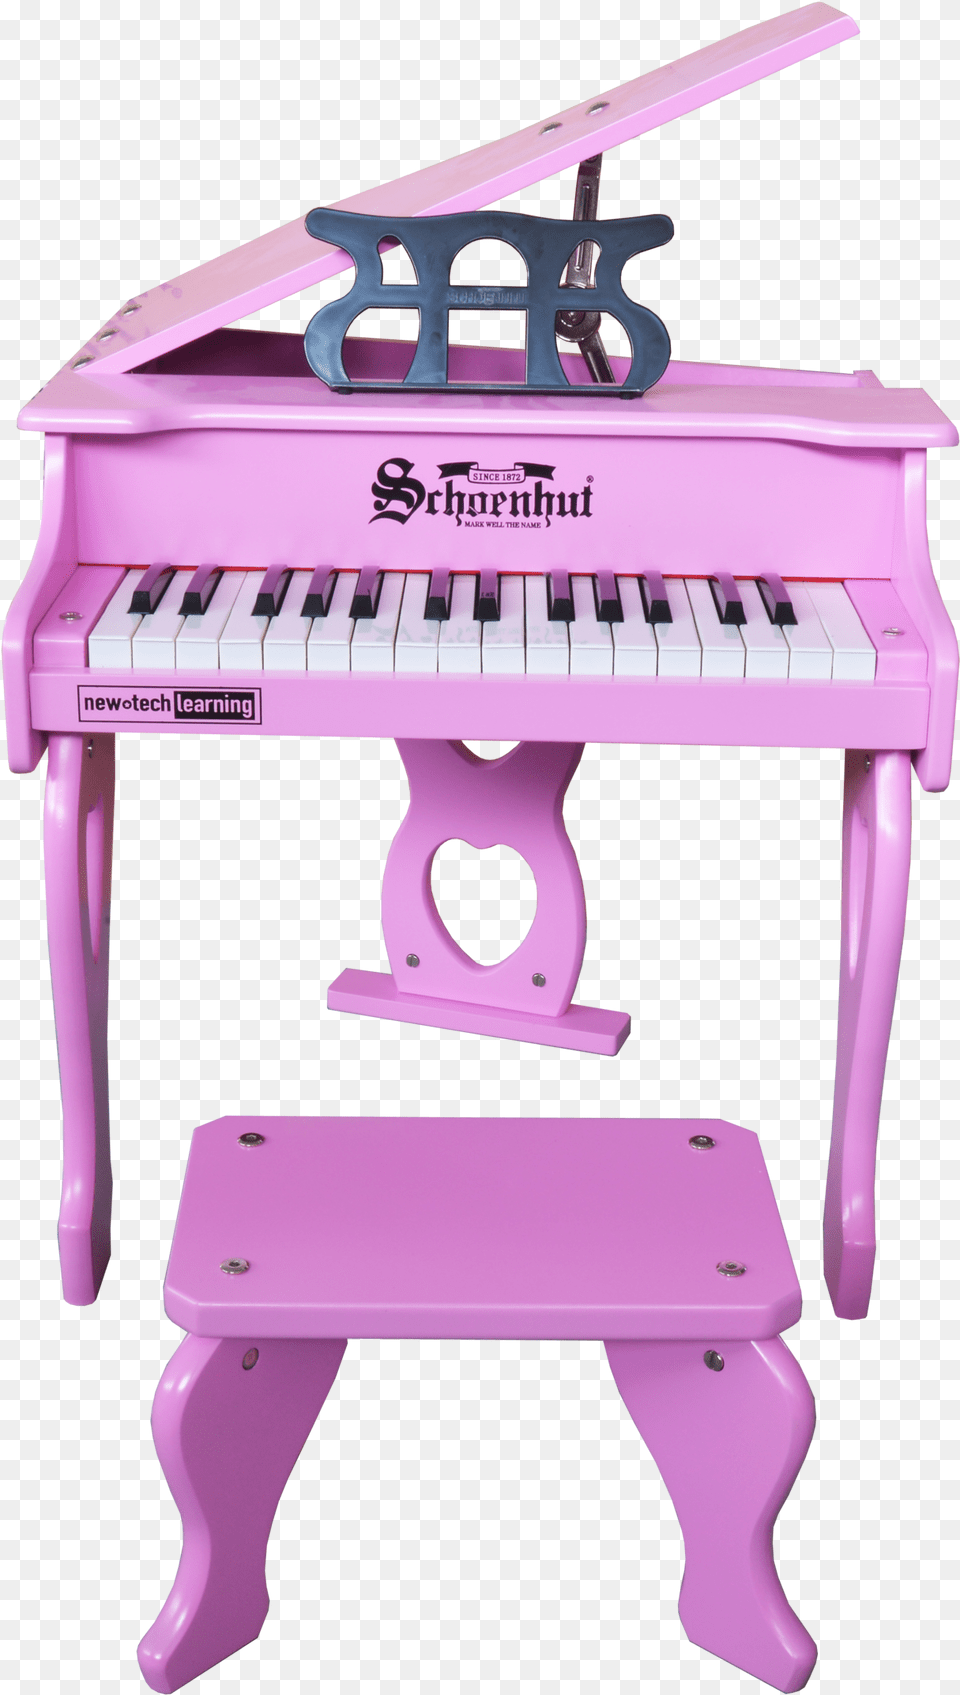 Schoenhut 30 Key Digital Baby Grand Piano Pink Electric Piano, Grand Piano, Keyboard, Musical Instrument Free Transparent Png